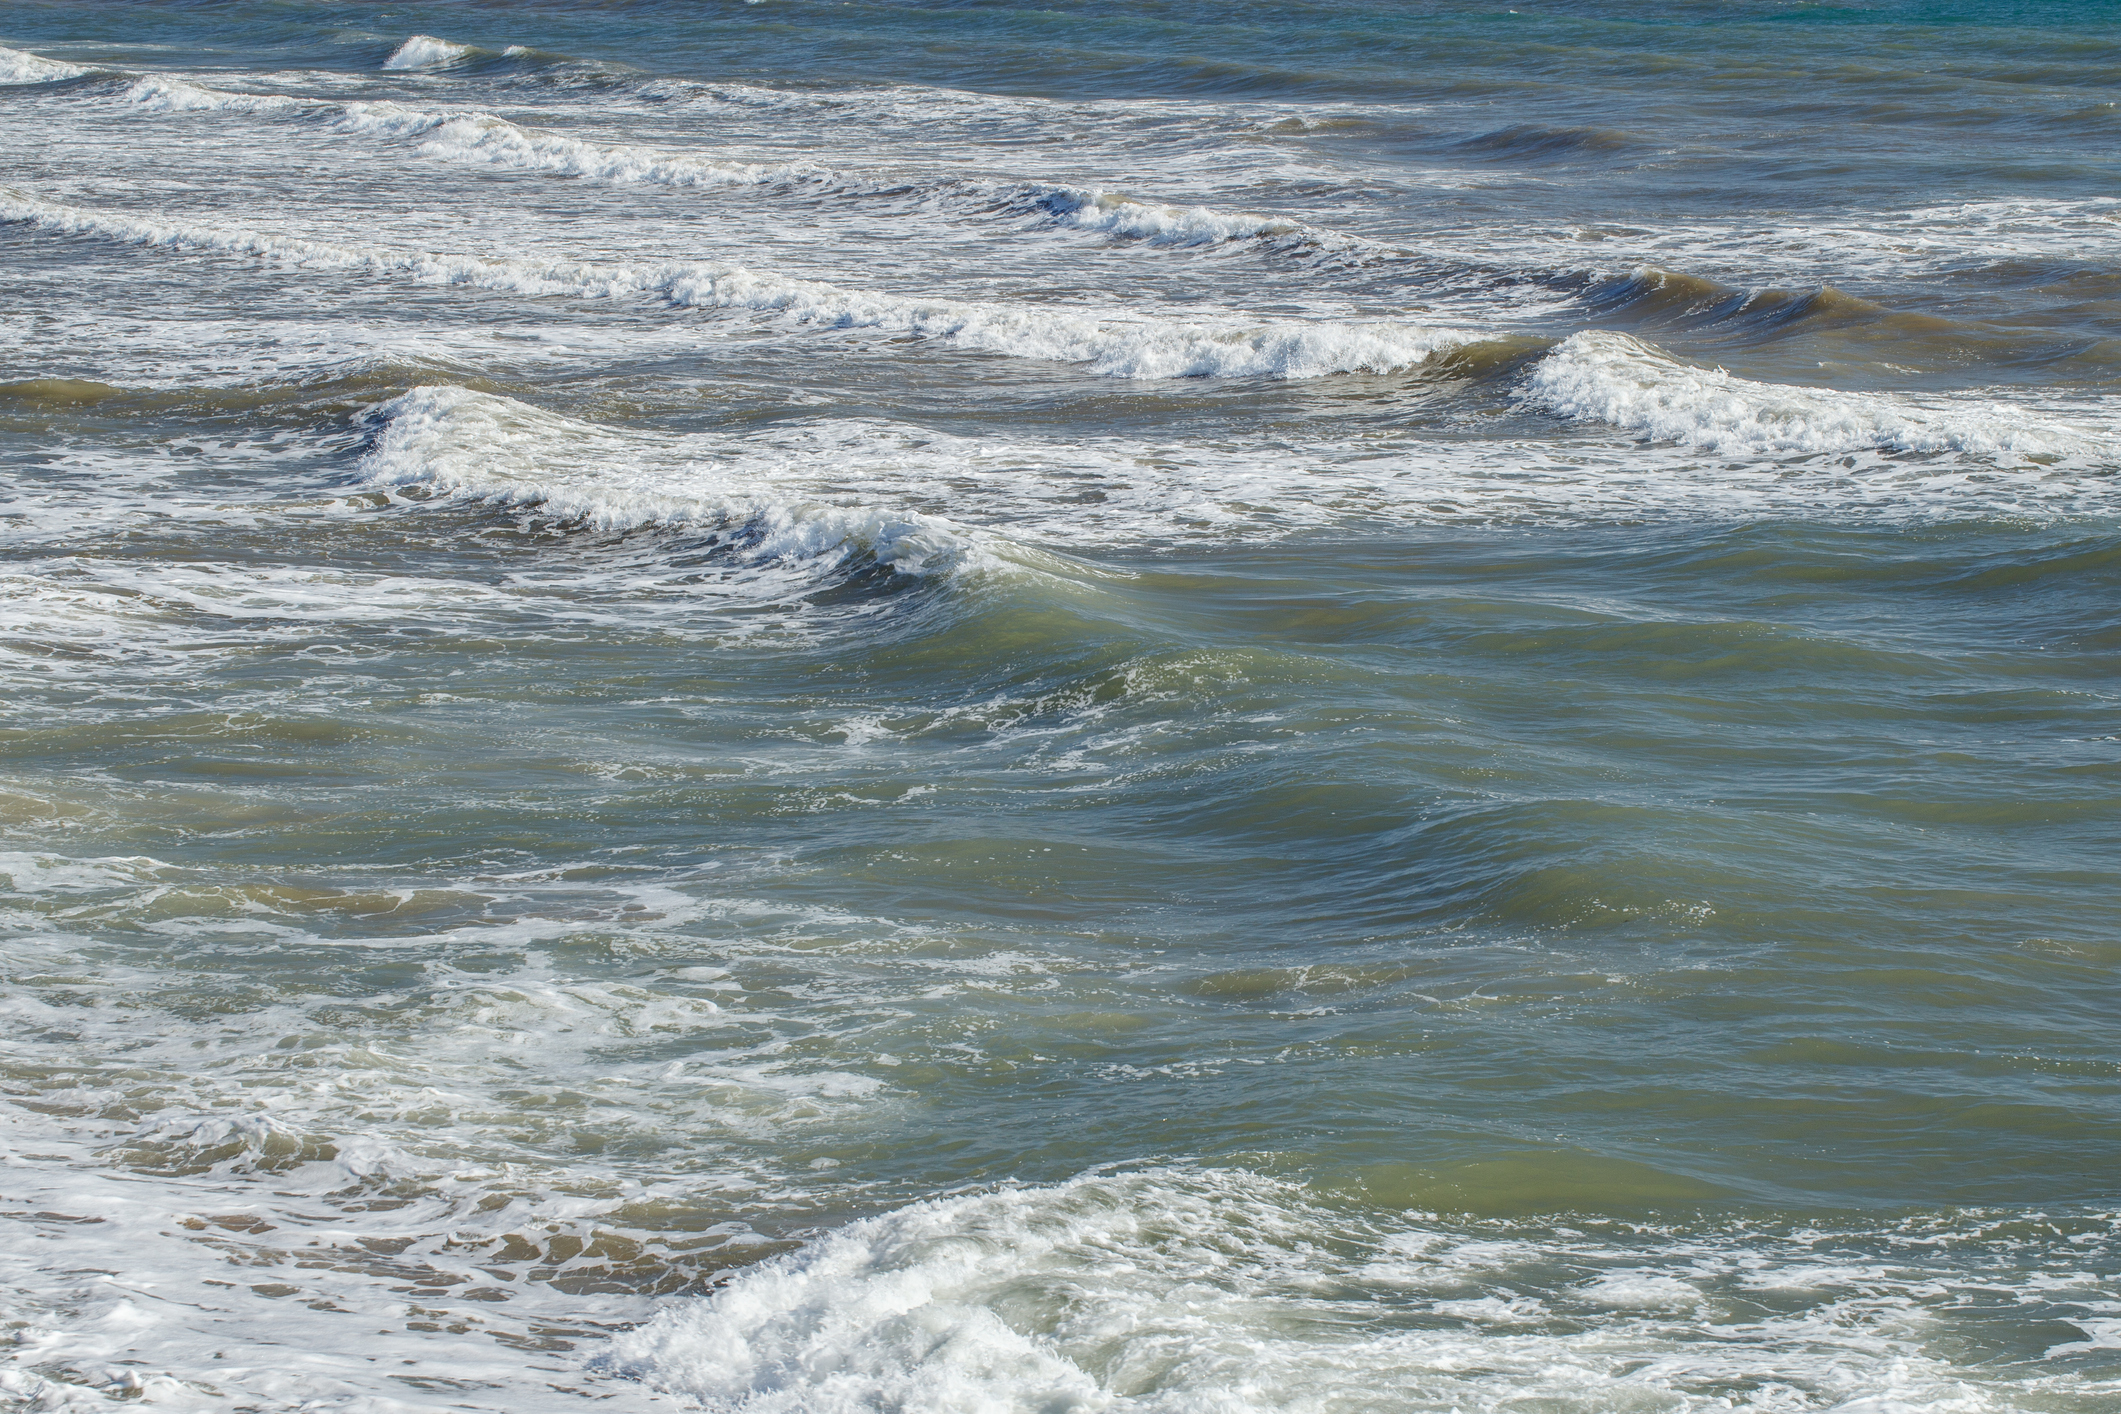 Waves gently crash on a serene, open sea. No people are visible in the image